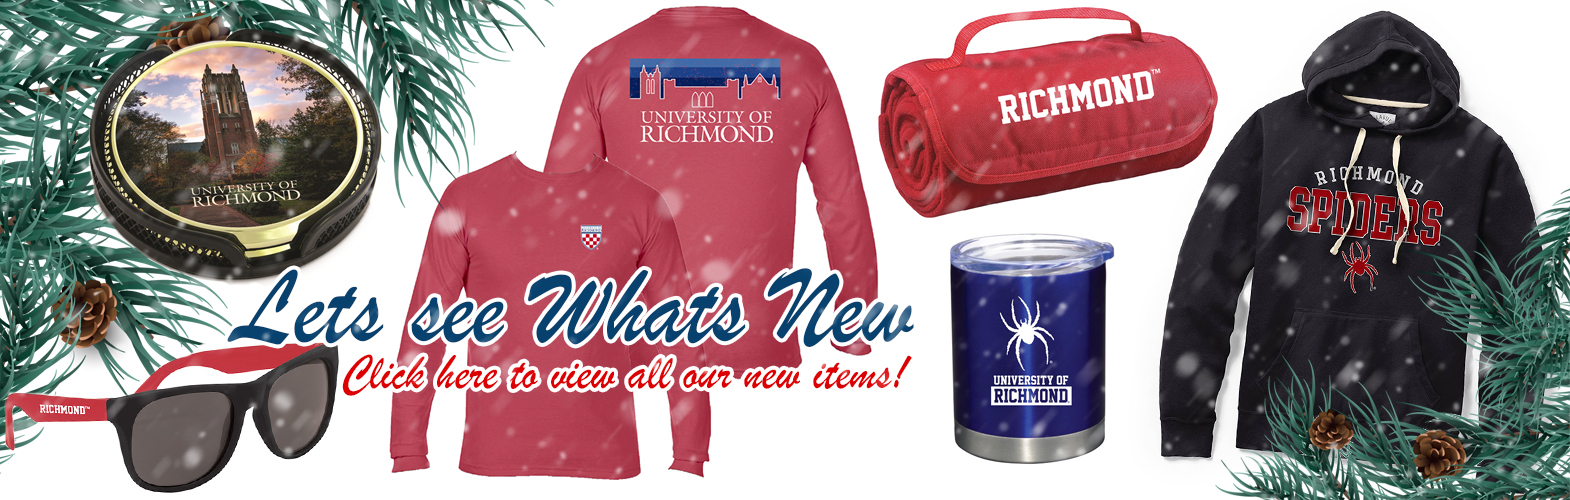 Items that encurage recyle made by and for university of richmond and spiders fans